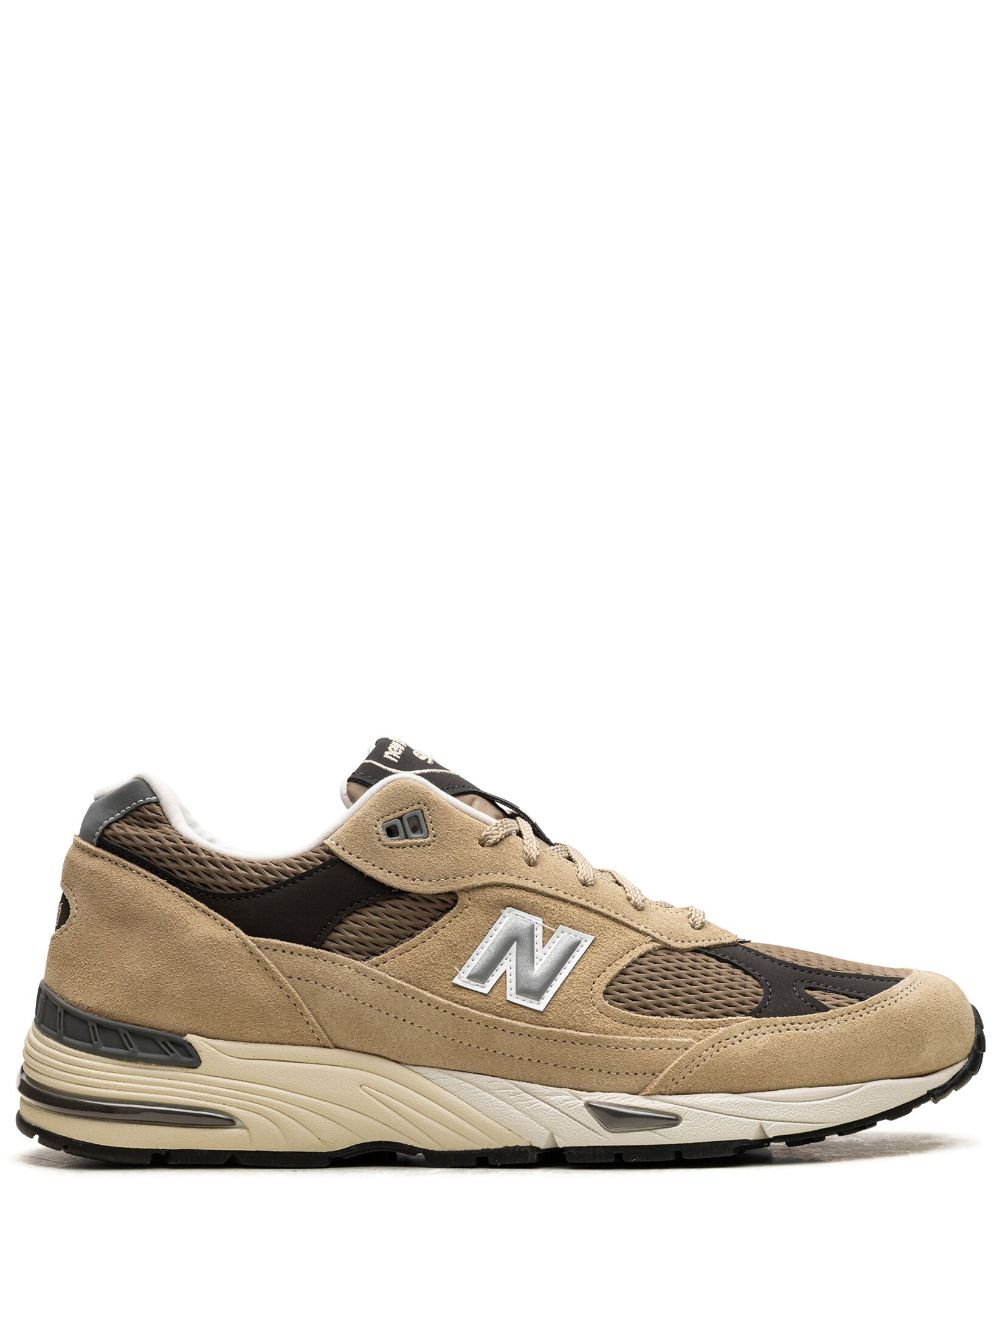 Image 1 of New Balance 991 "Finale Pack - Pale Khaki" sneakers